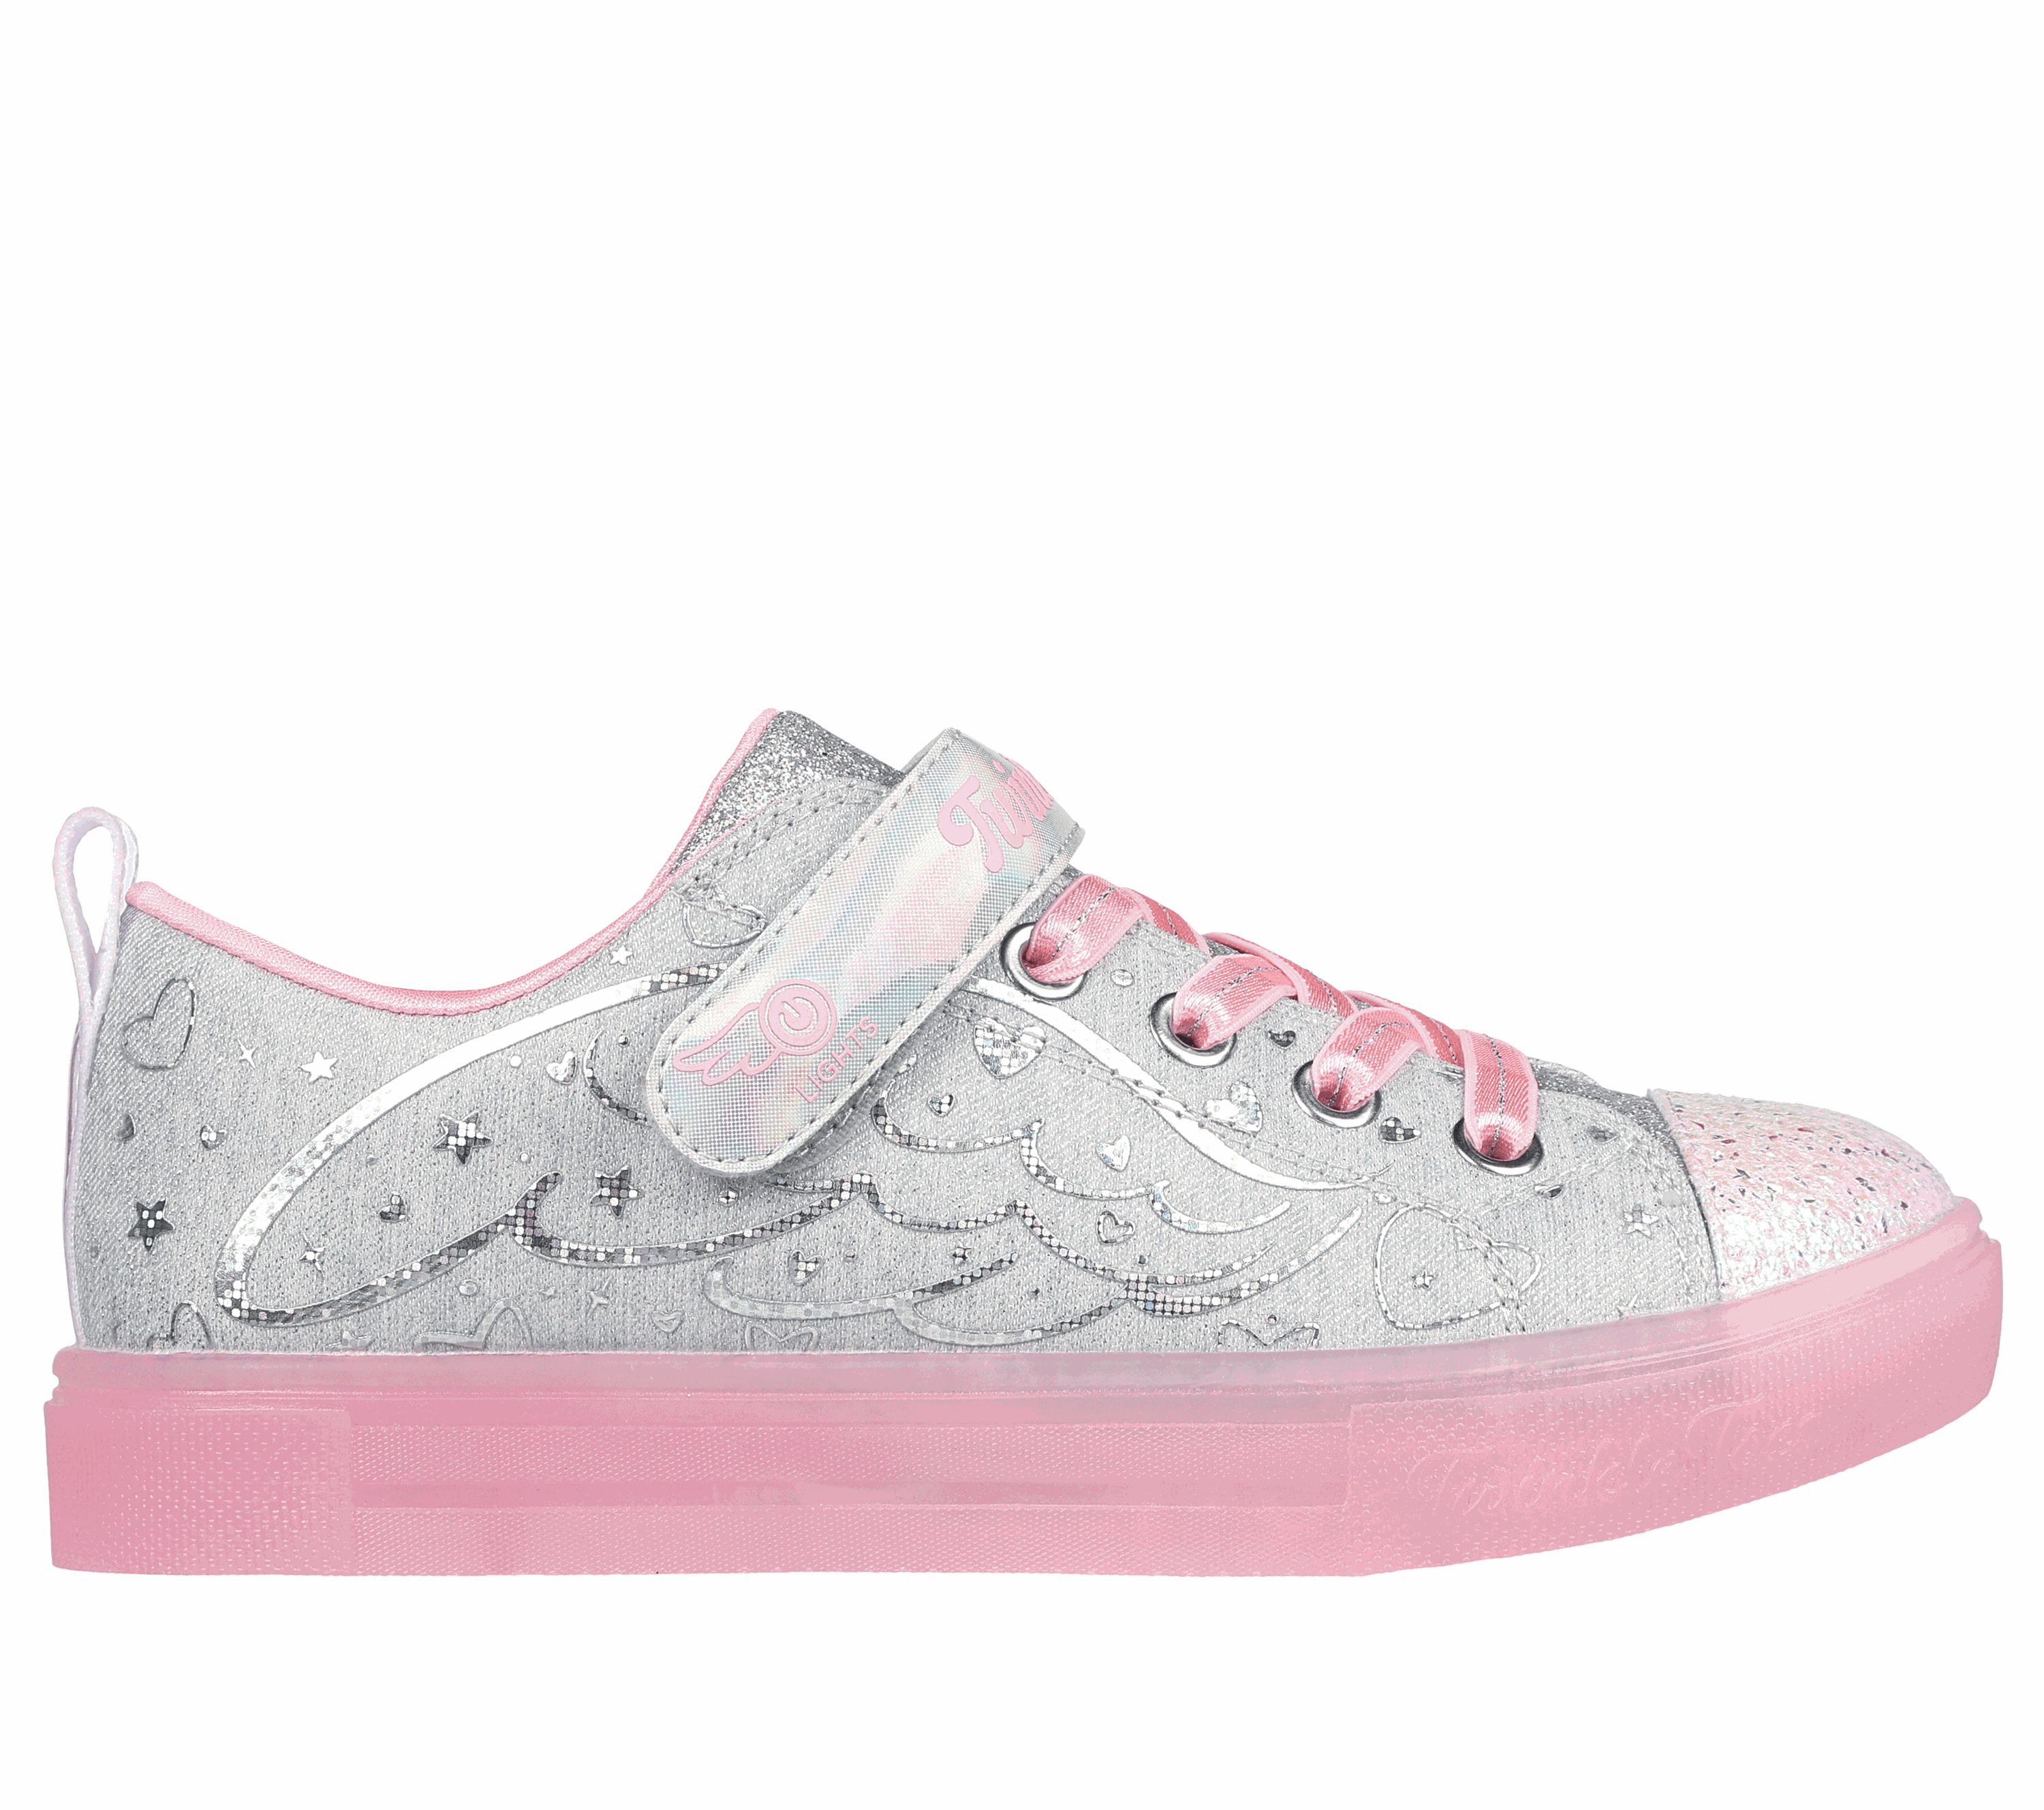 Andrew Halliday Fluisteren Manie Twinkle Toes: Twinkle Sparks Ice - Heather Magic | SKECHERS